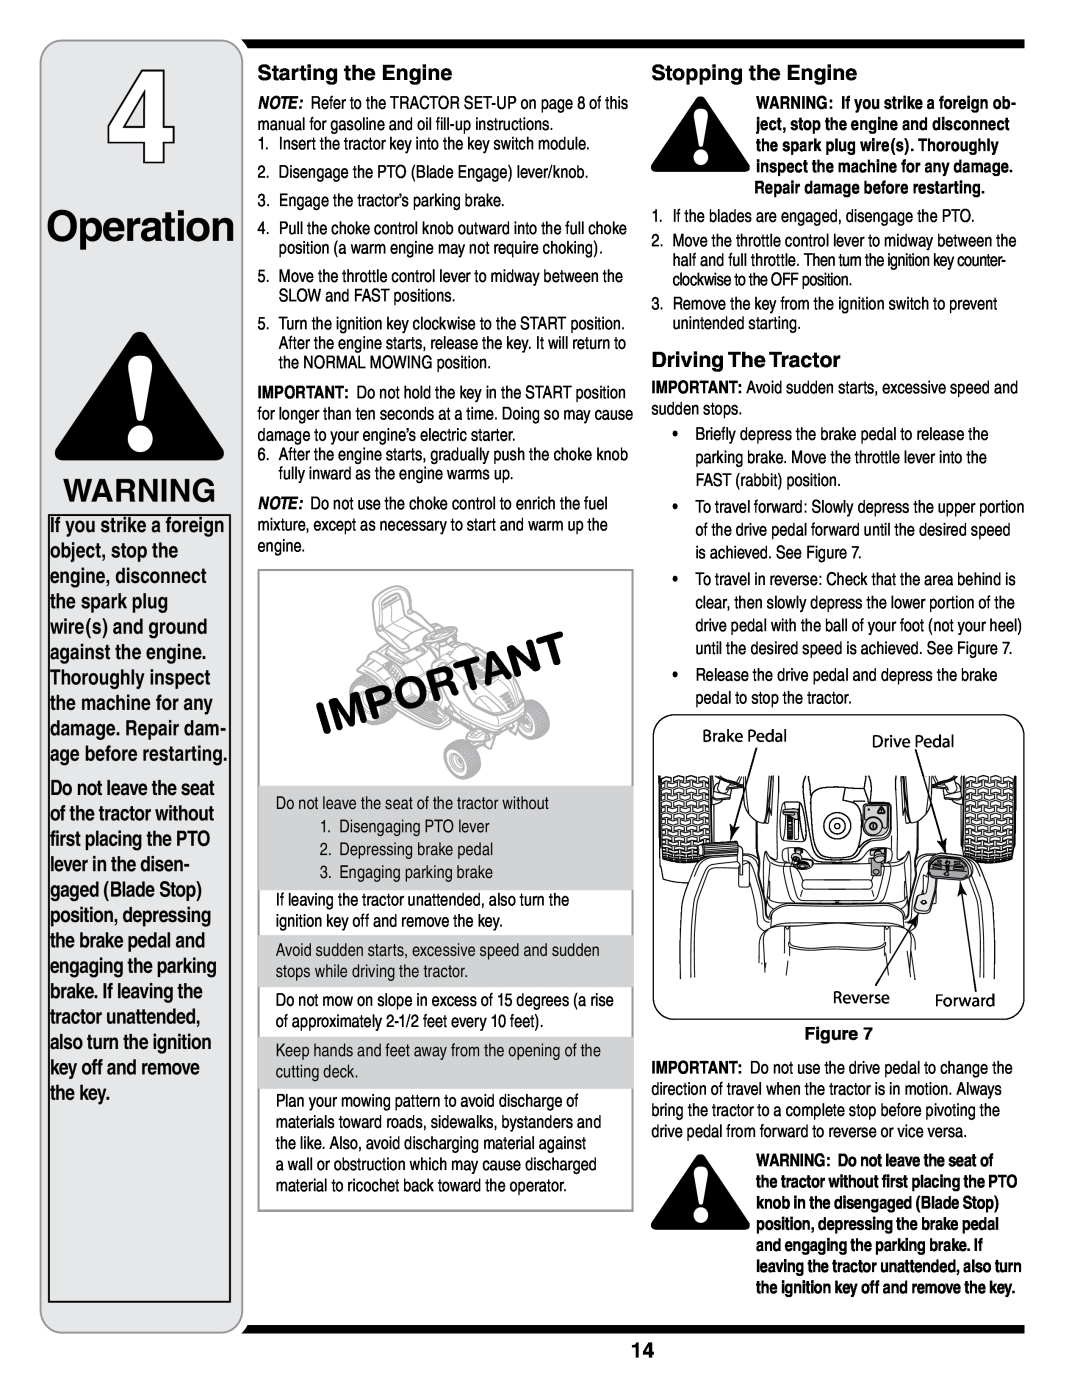 MTD i1046, i1050 warranty Starting the Engine, Stopping the Engine, Driving The Tractor, Operation 